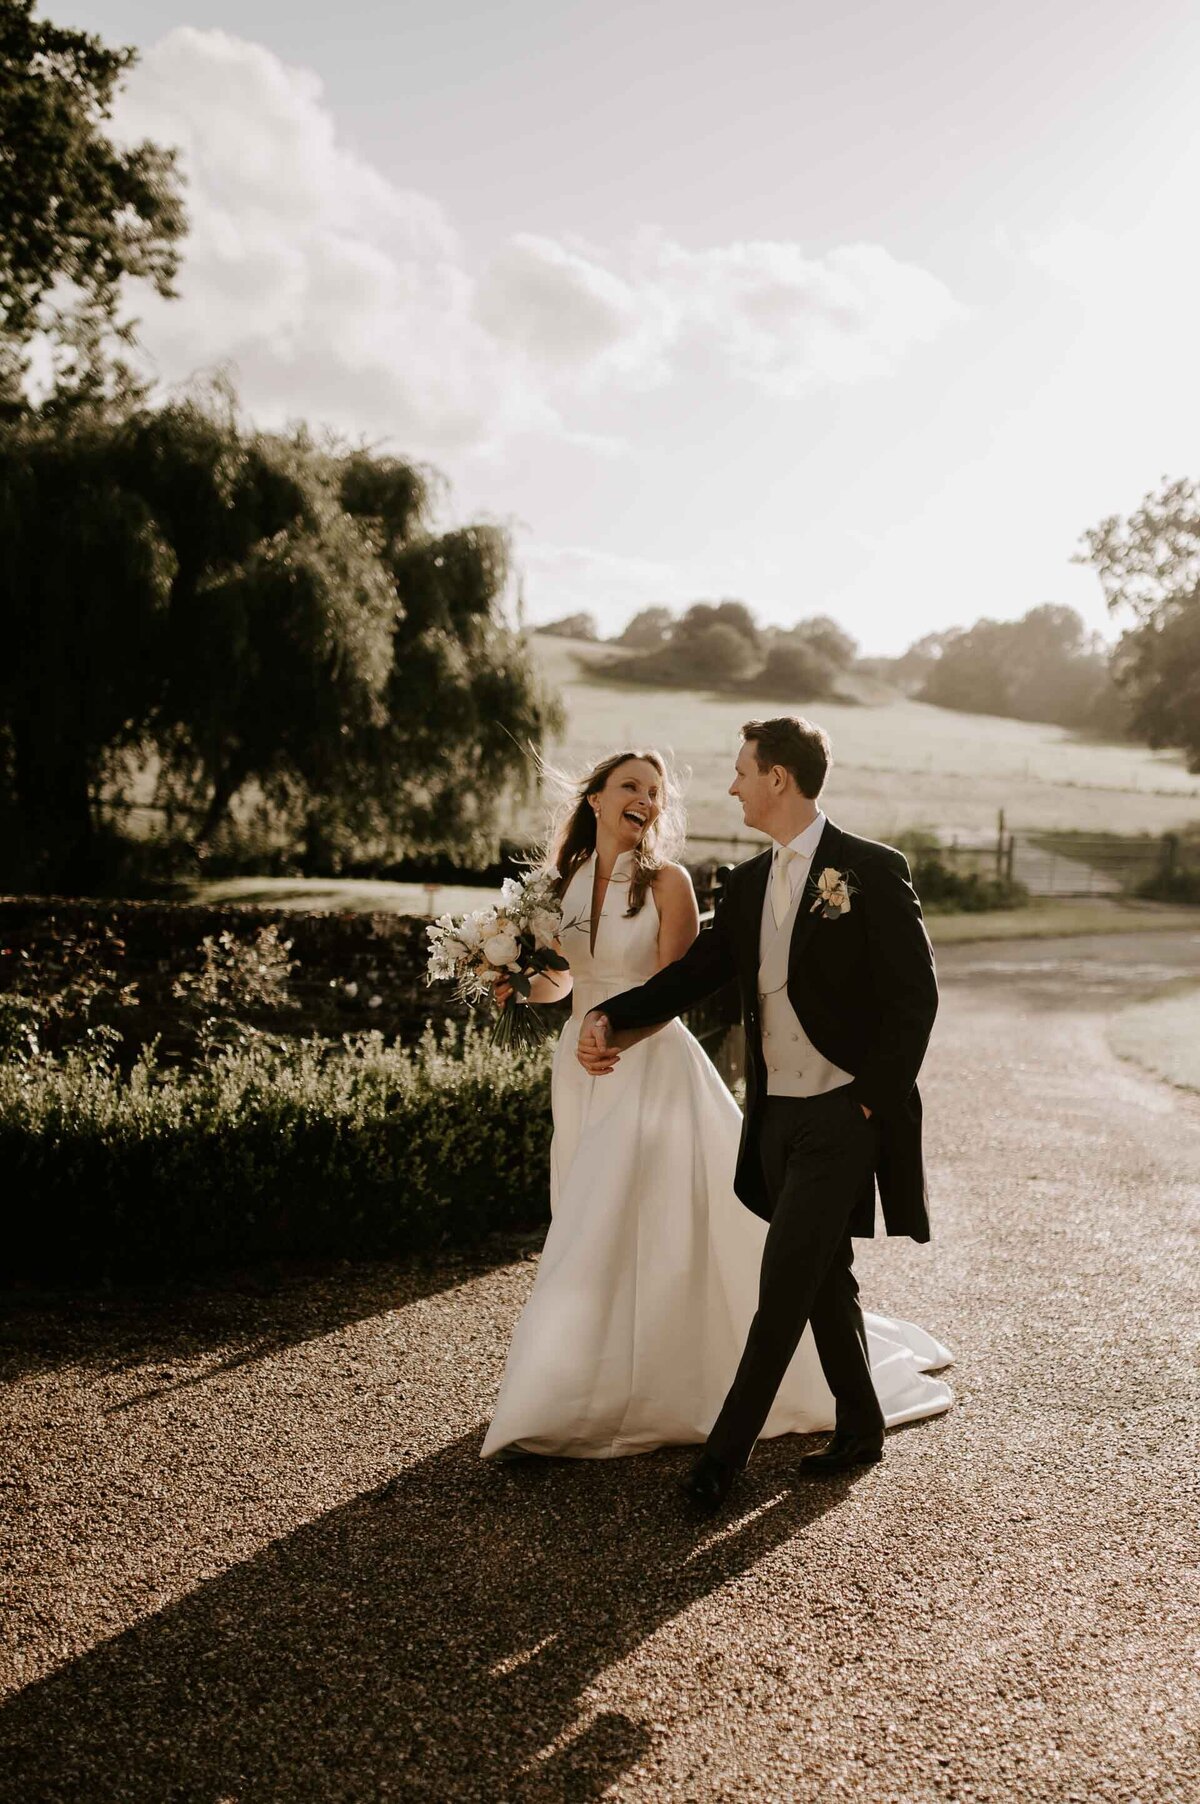 Louise and Tom Wedding - Laura Williams Photography - 1123